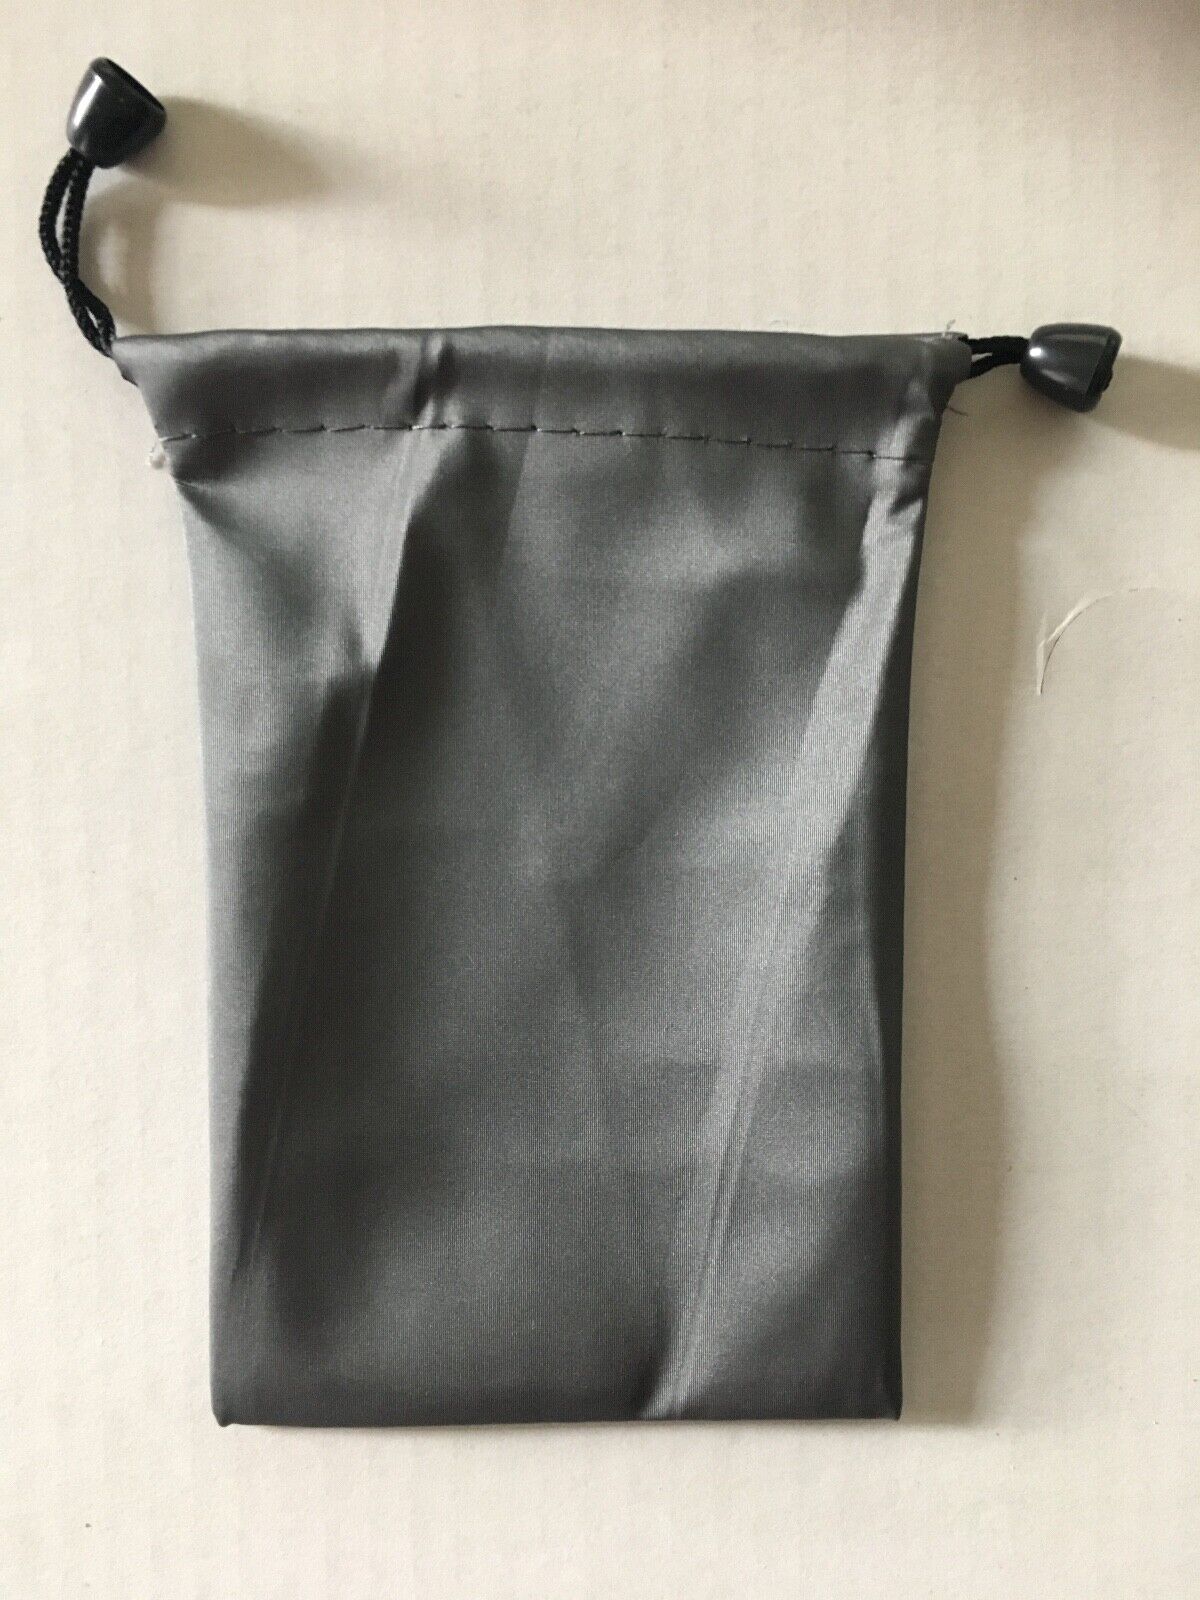 Soft Nylon Waterproof Pouch Drawstring Bag for Multi Purpose Use